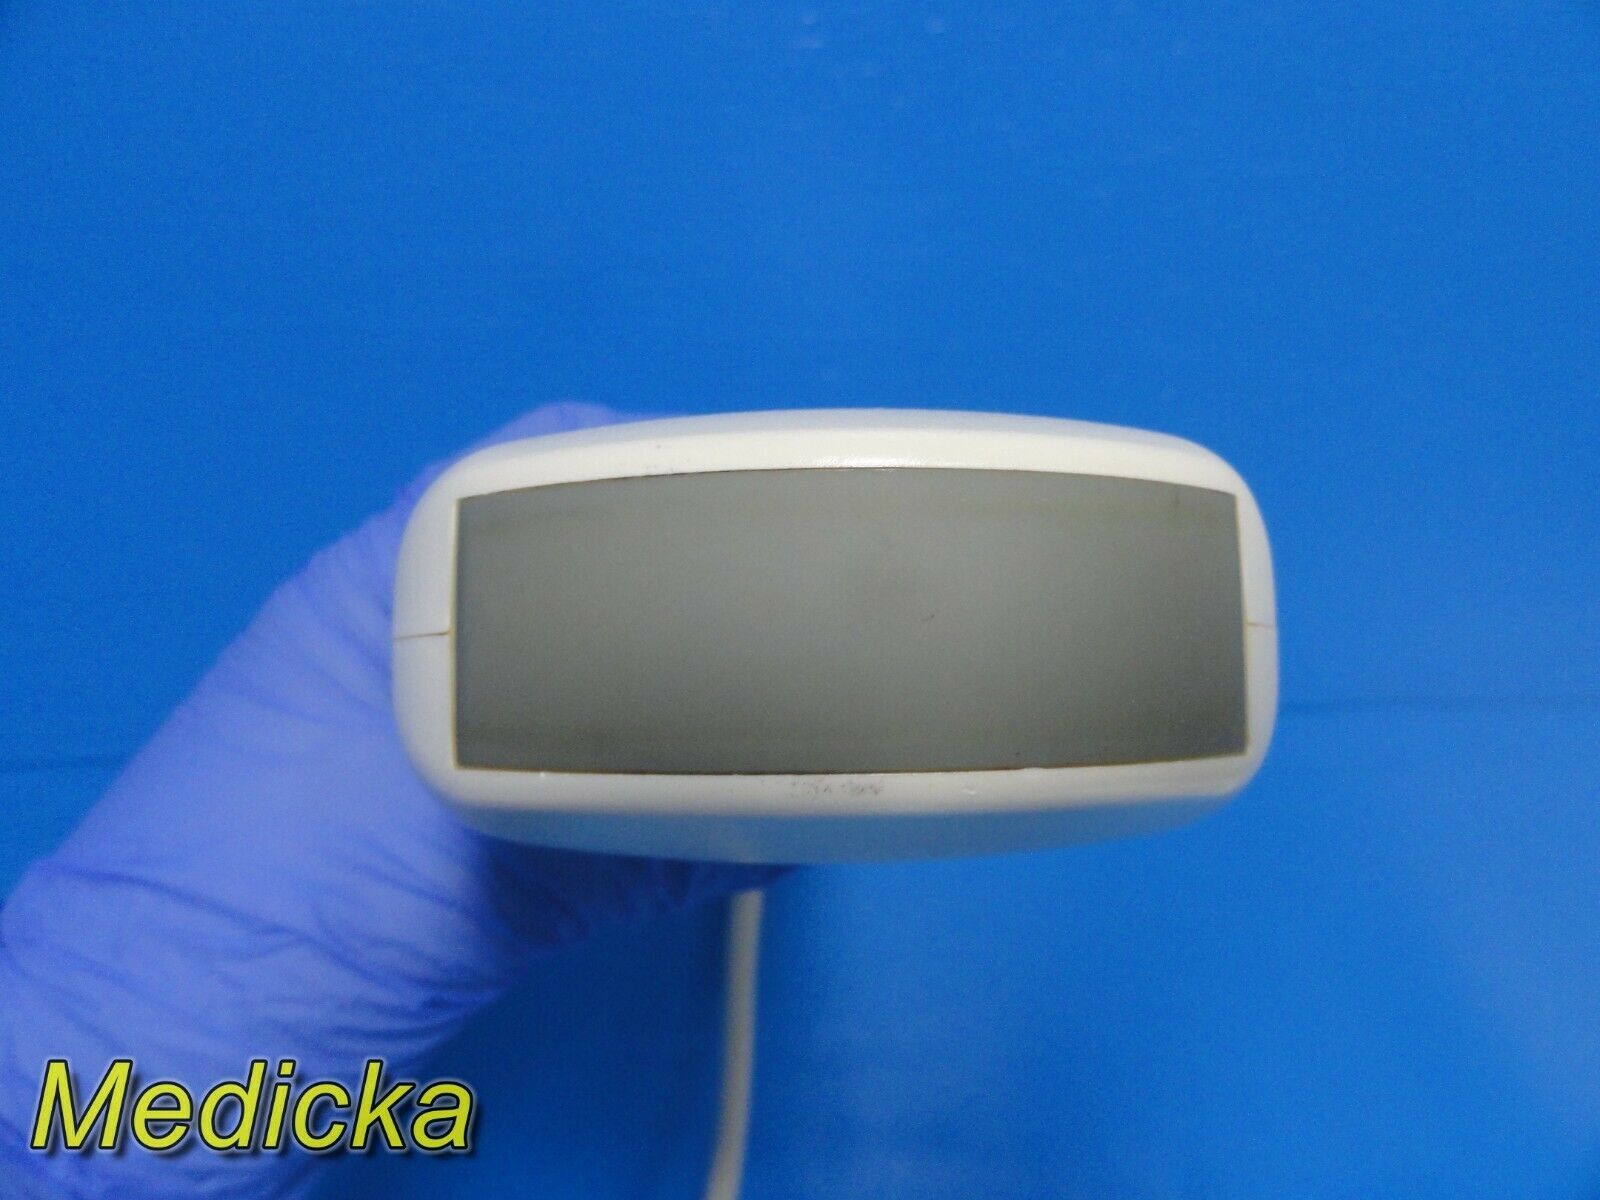 Philips C5-2 40R (4000-0574-06) Curved Array Ultrasound Transducer Probe ~ 21278 DIAGNOSTIC ULTRASOUND MACHINES FOR SALE